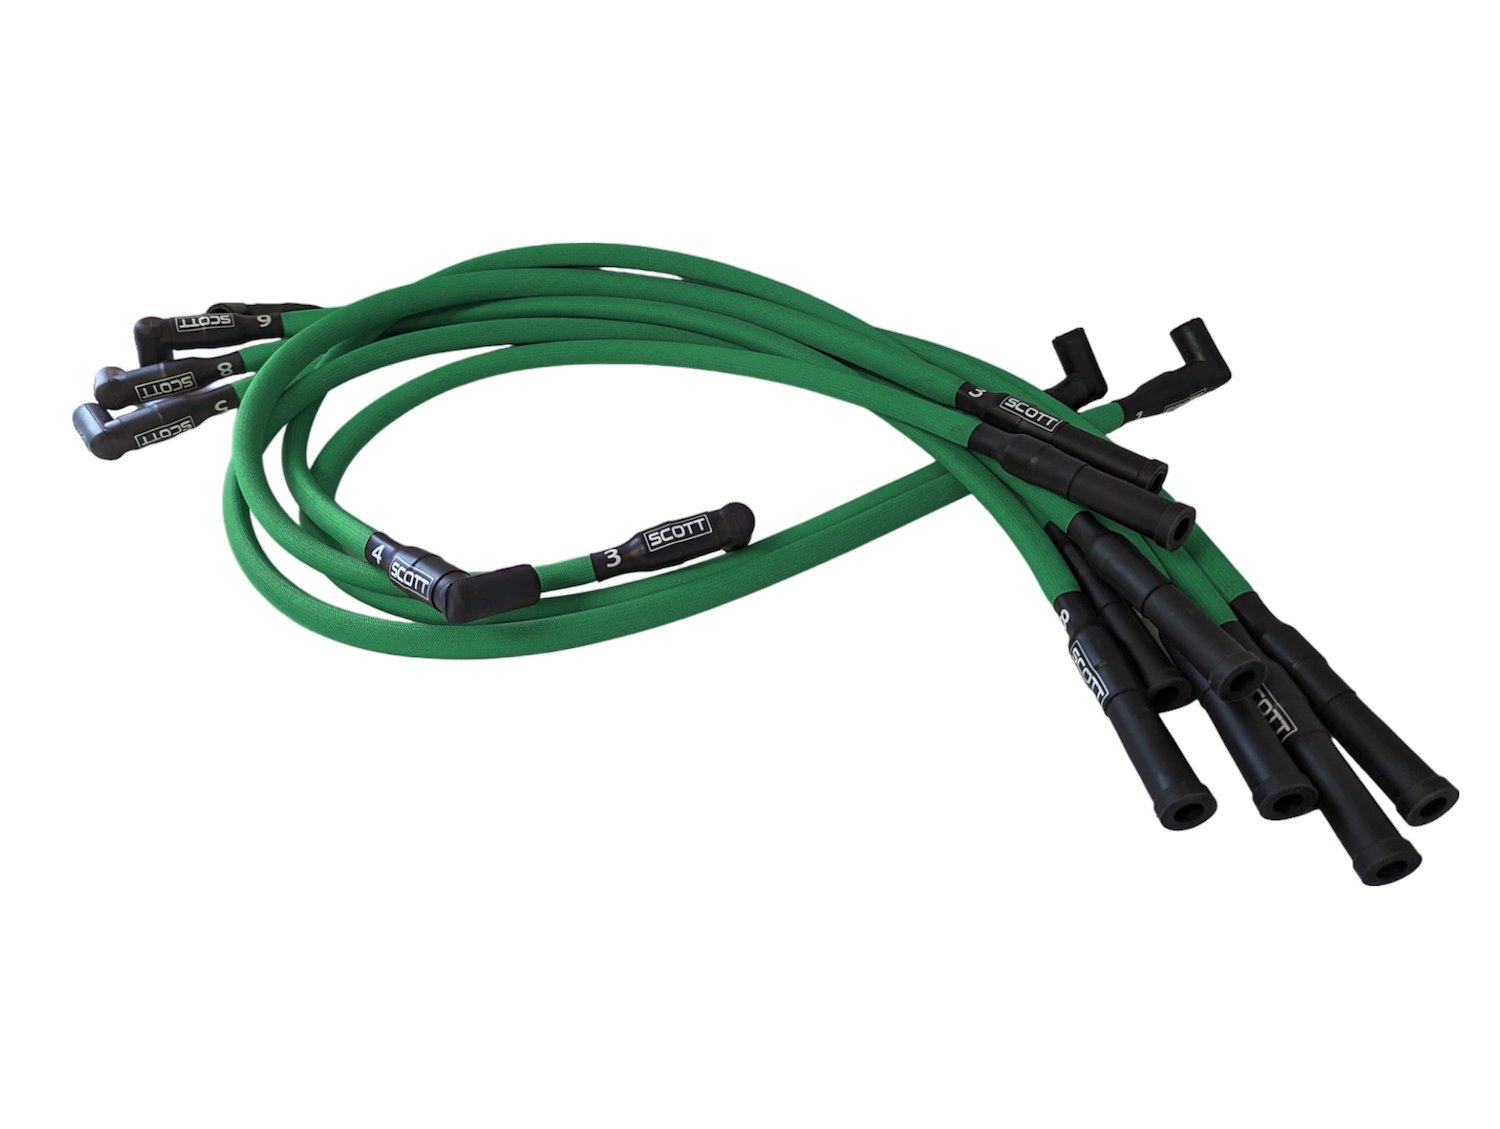 SPW-PS-660-4 High-Performance Fiberglass-Oversleeved Spark Plug Wire Set for Small Block Dodge [Green]